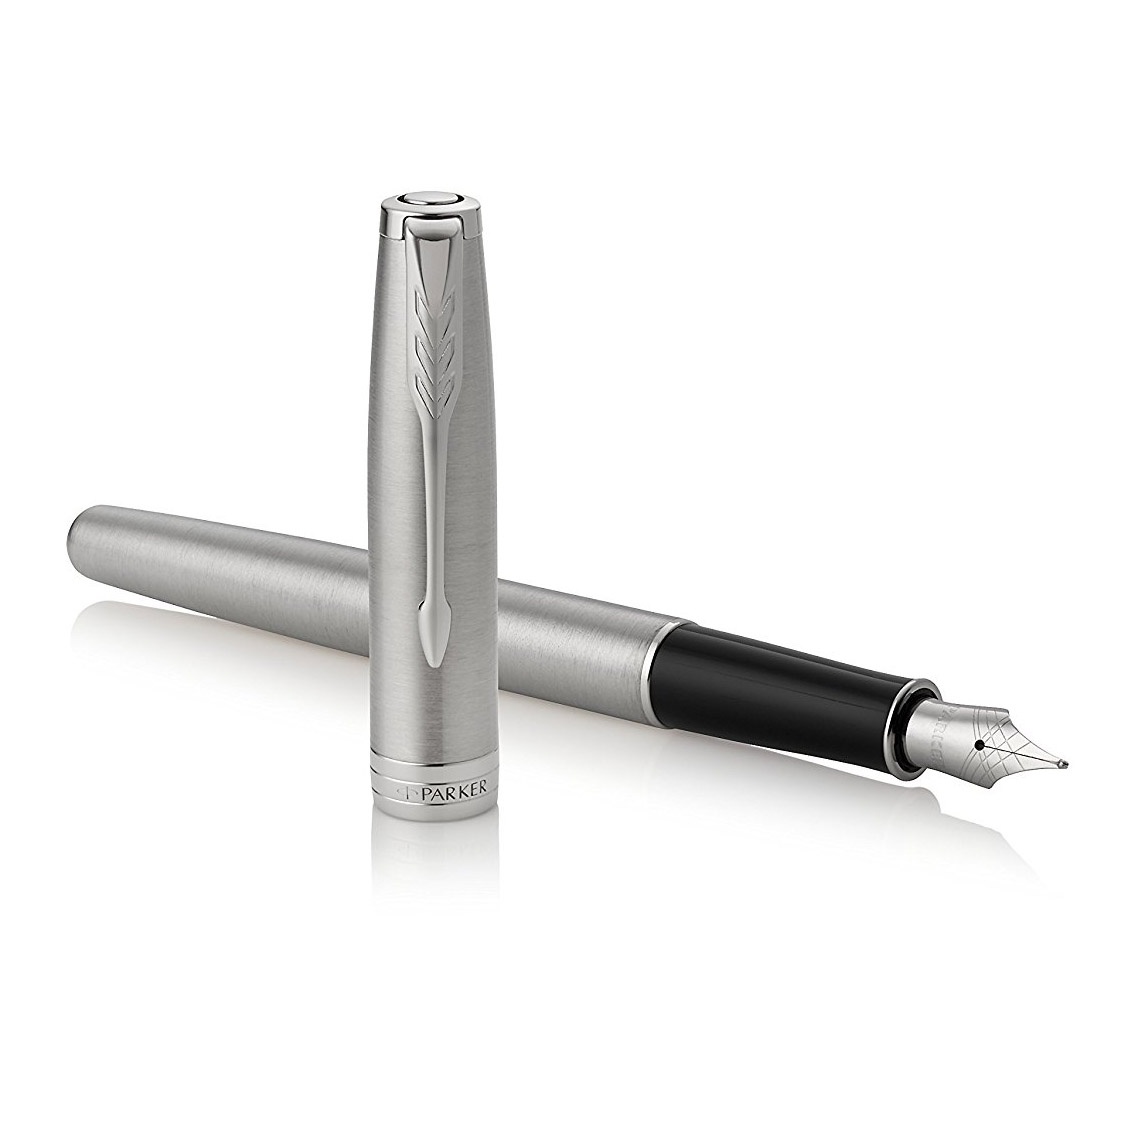 Sonnet Steel/Chrome Fountain pen in the group Pens / Fine Writing / Gift Pens at Voorcrea (104817_r)